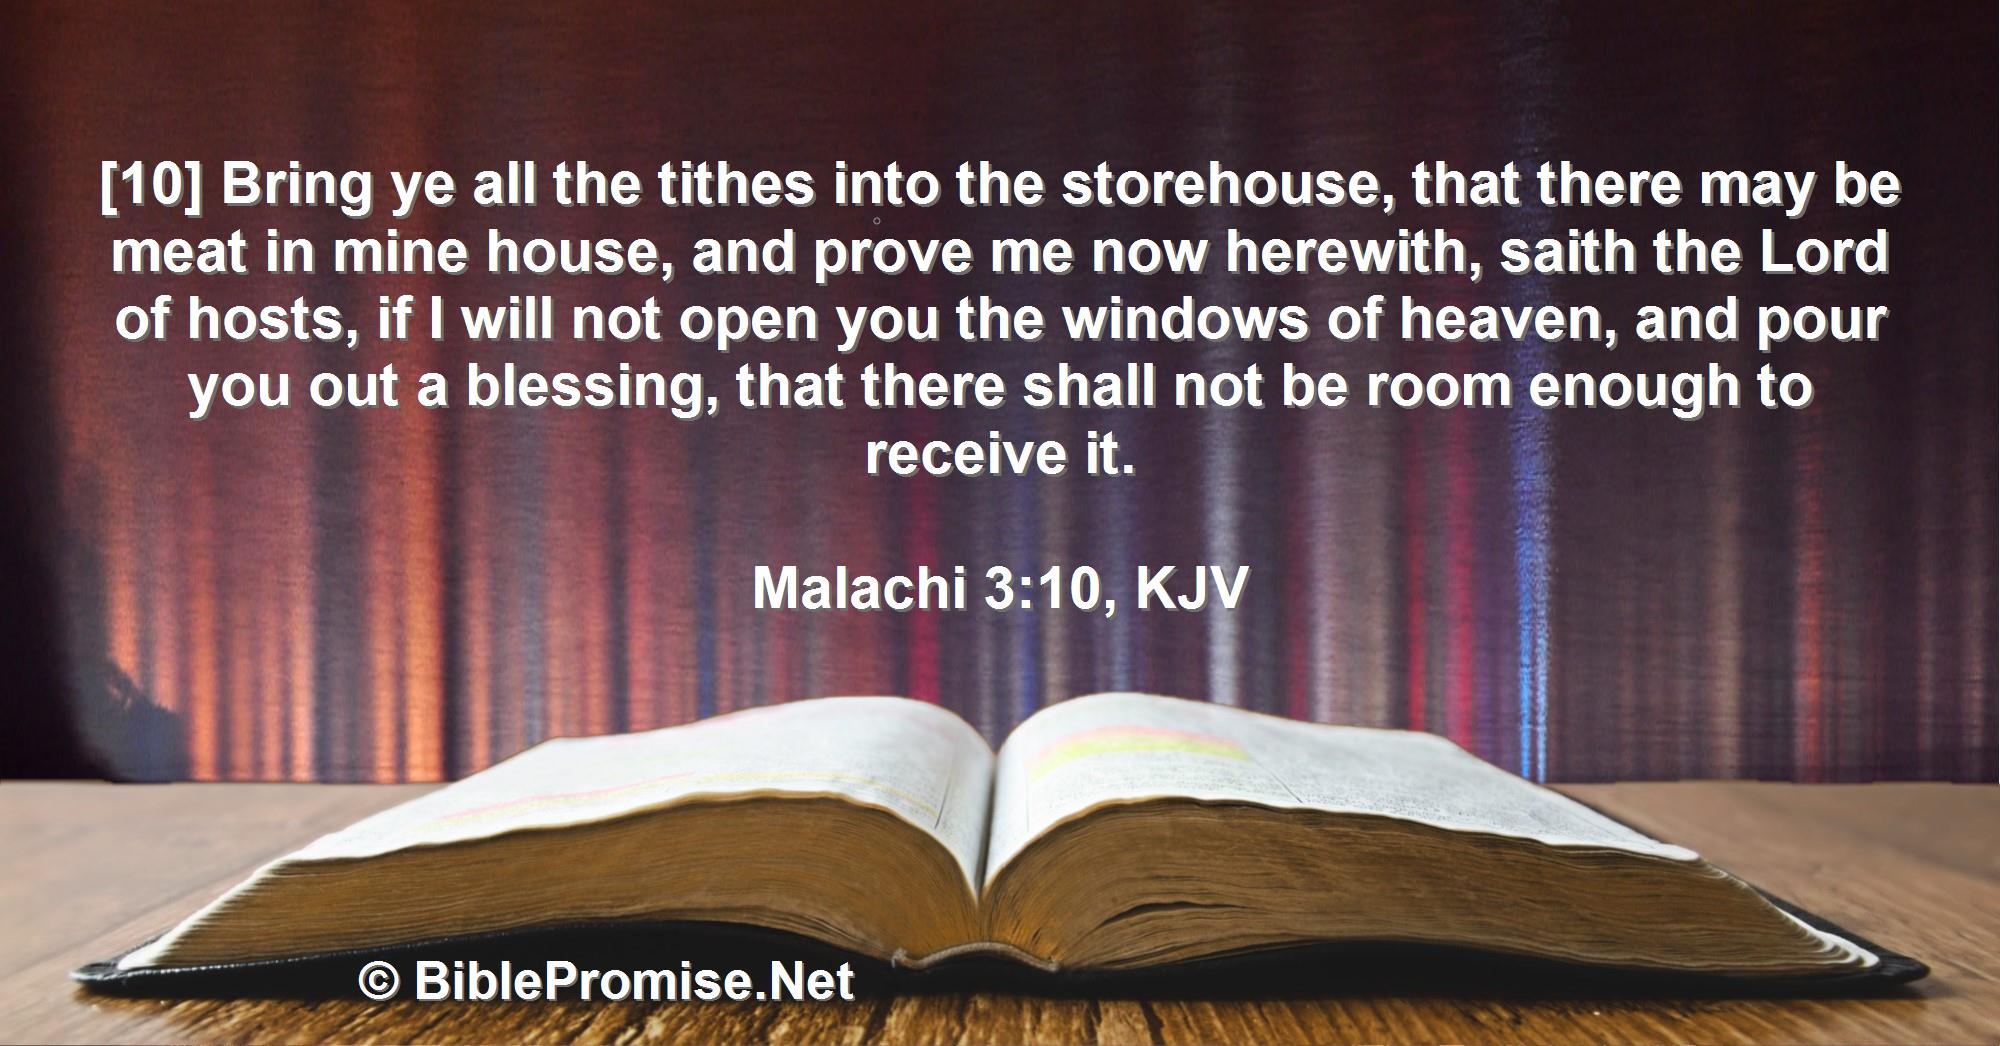 Tuesday, September 20, 2022 - Malachi 3:10 (KJV) - Bible promise that God will pour out for you such blessing that there will not be room enough to receive it, if you bring all the tithes to Him.